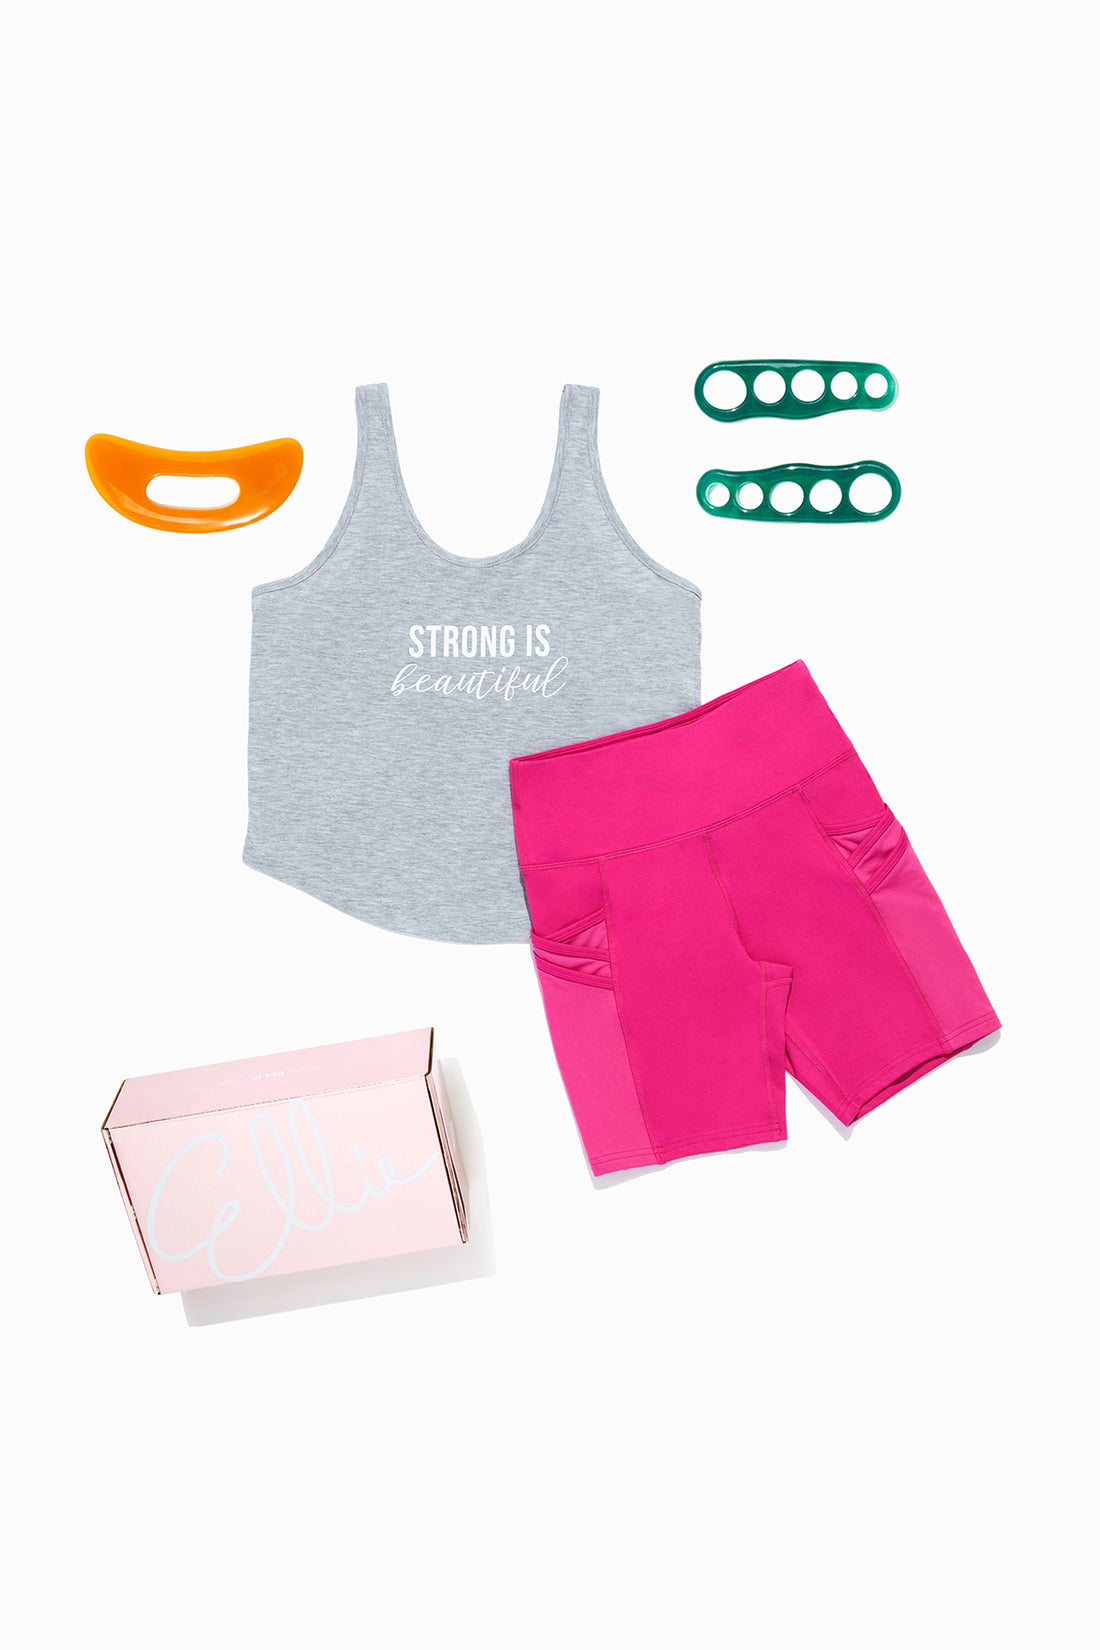 Pink Is Power - 5 Items